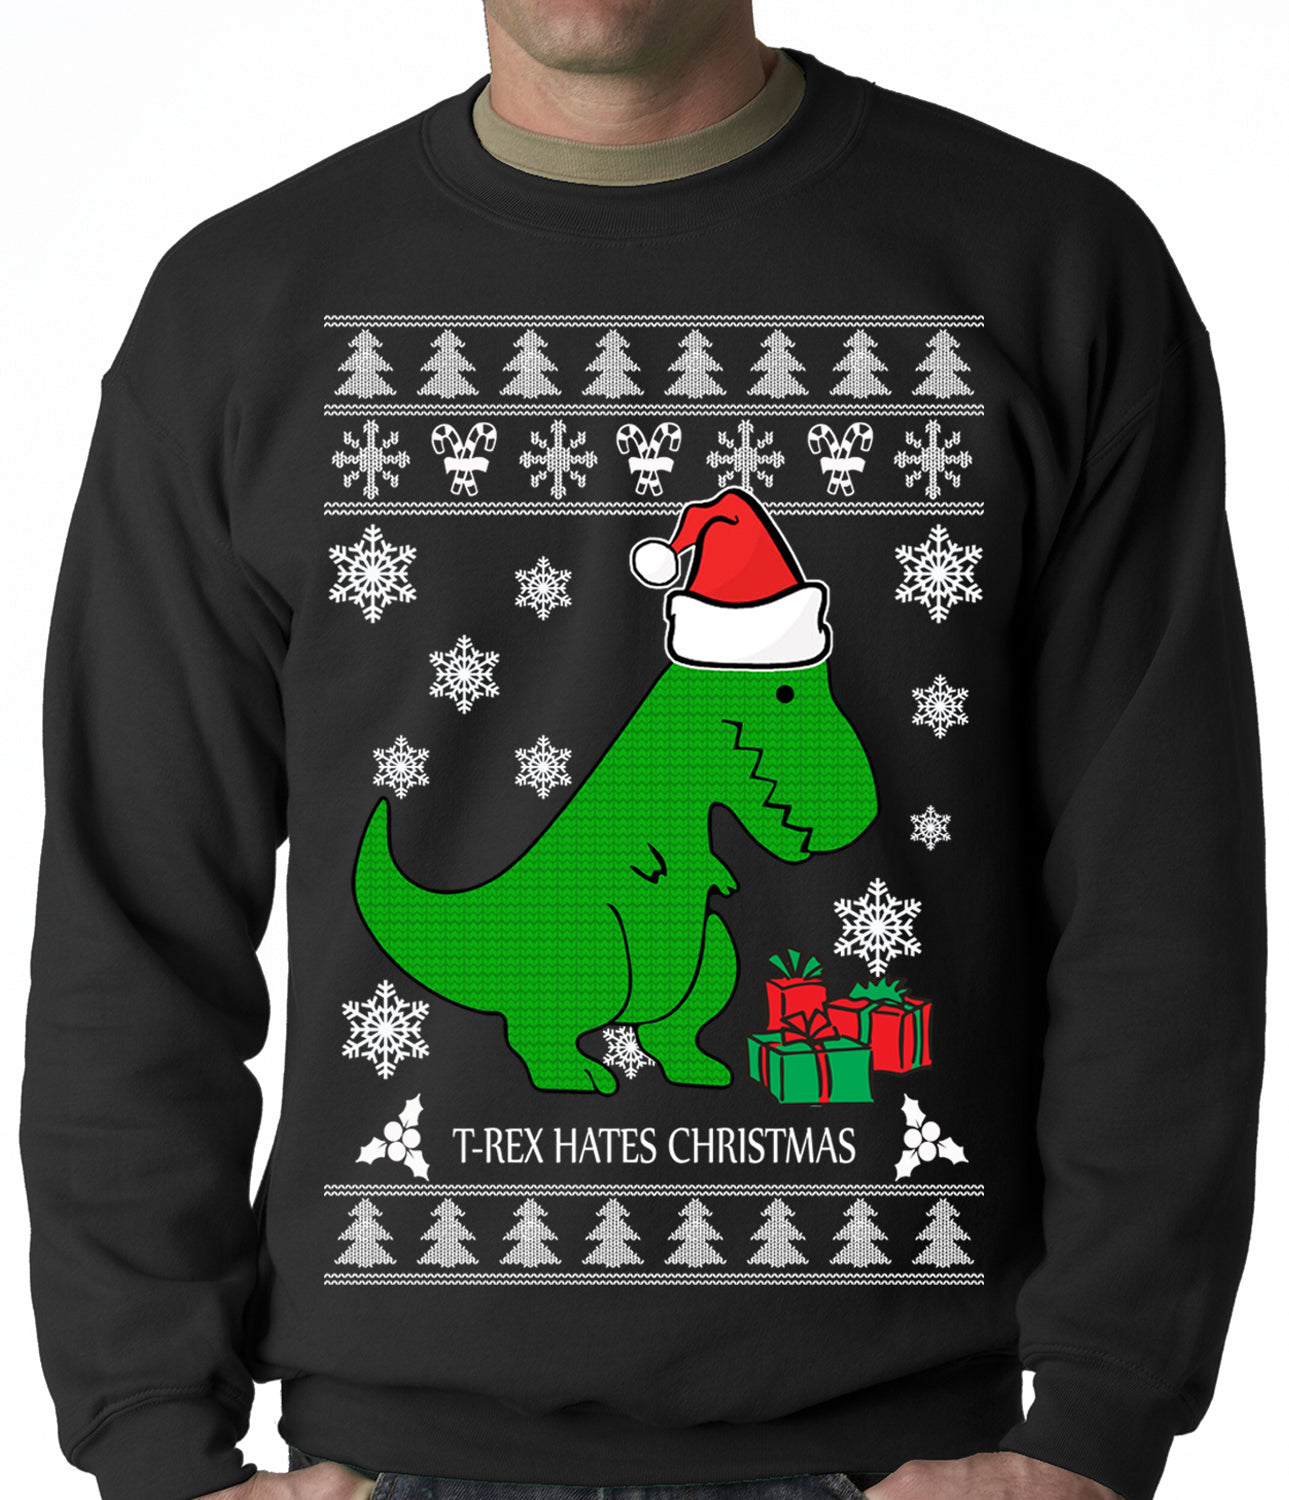 T-Rex Hates Christmas - Ugly Christmas Sweater Adult Thermal Shirt